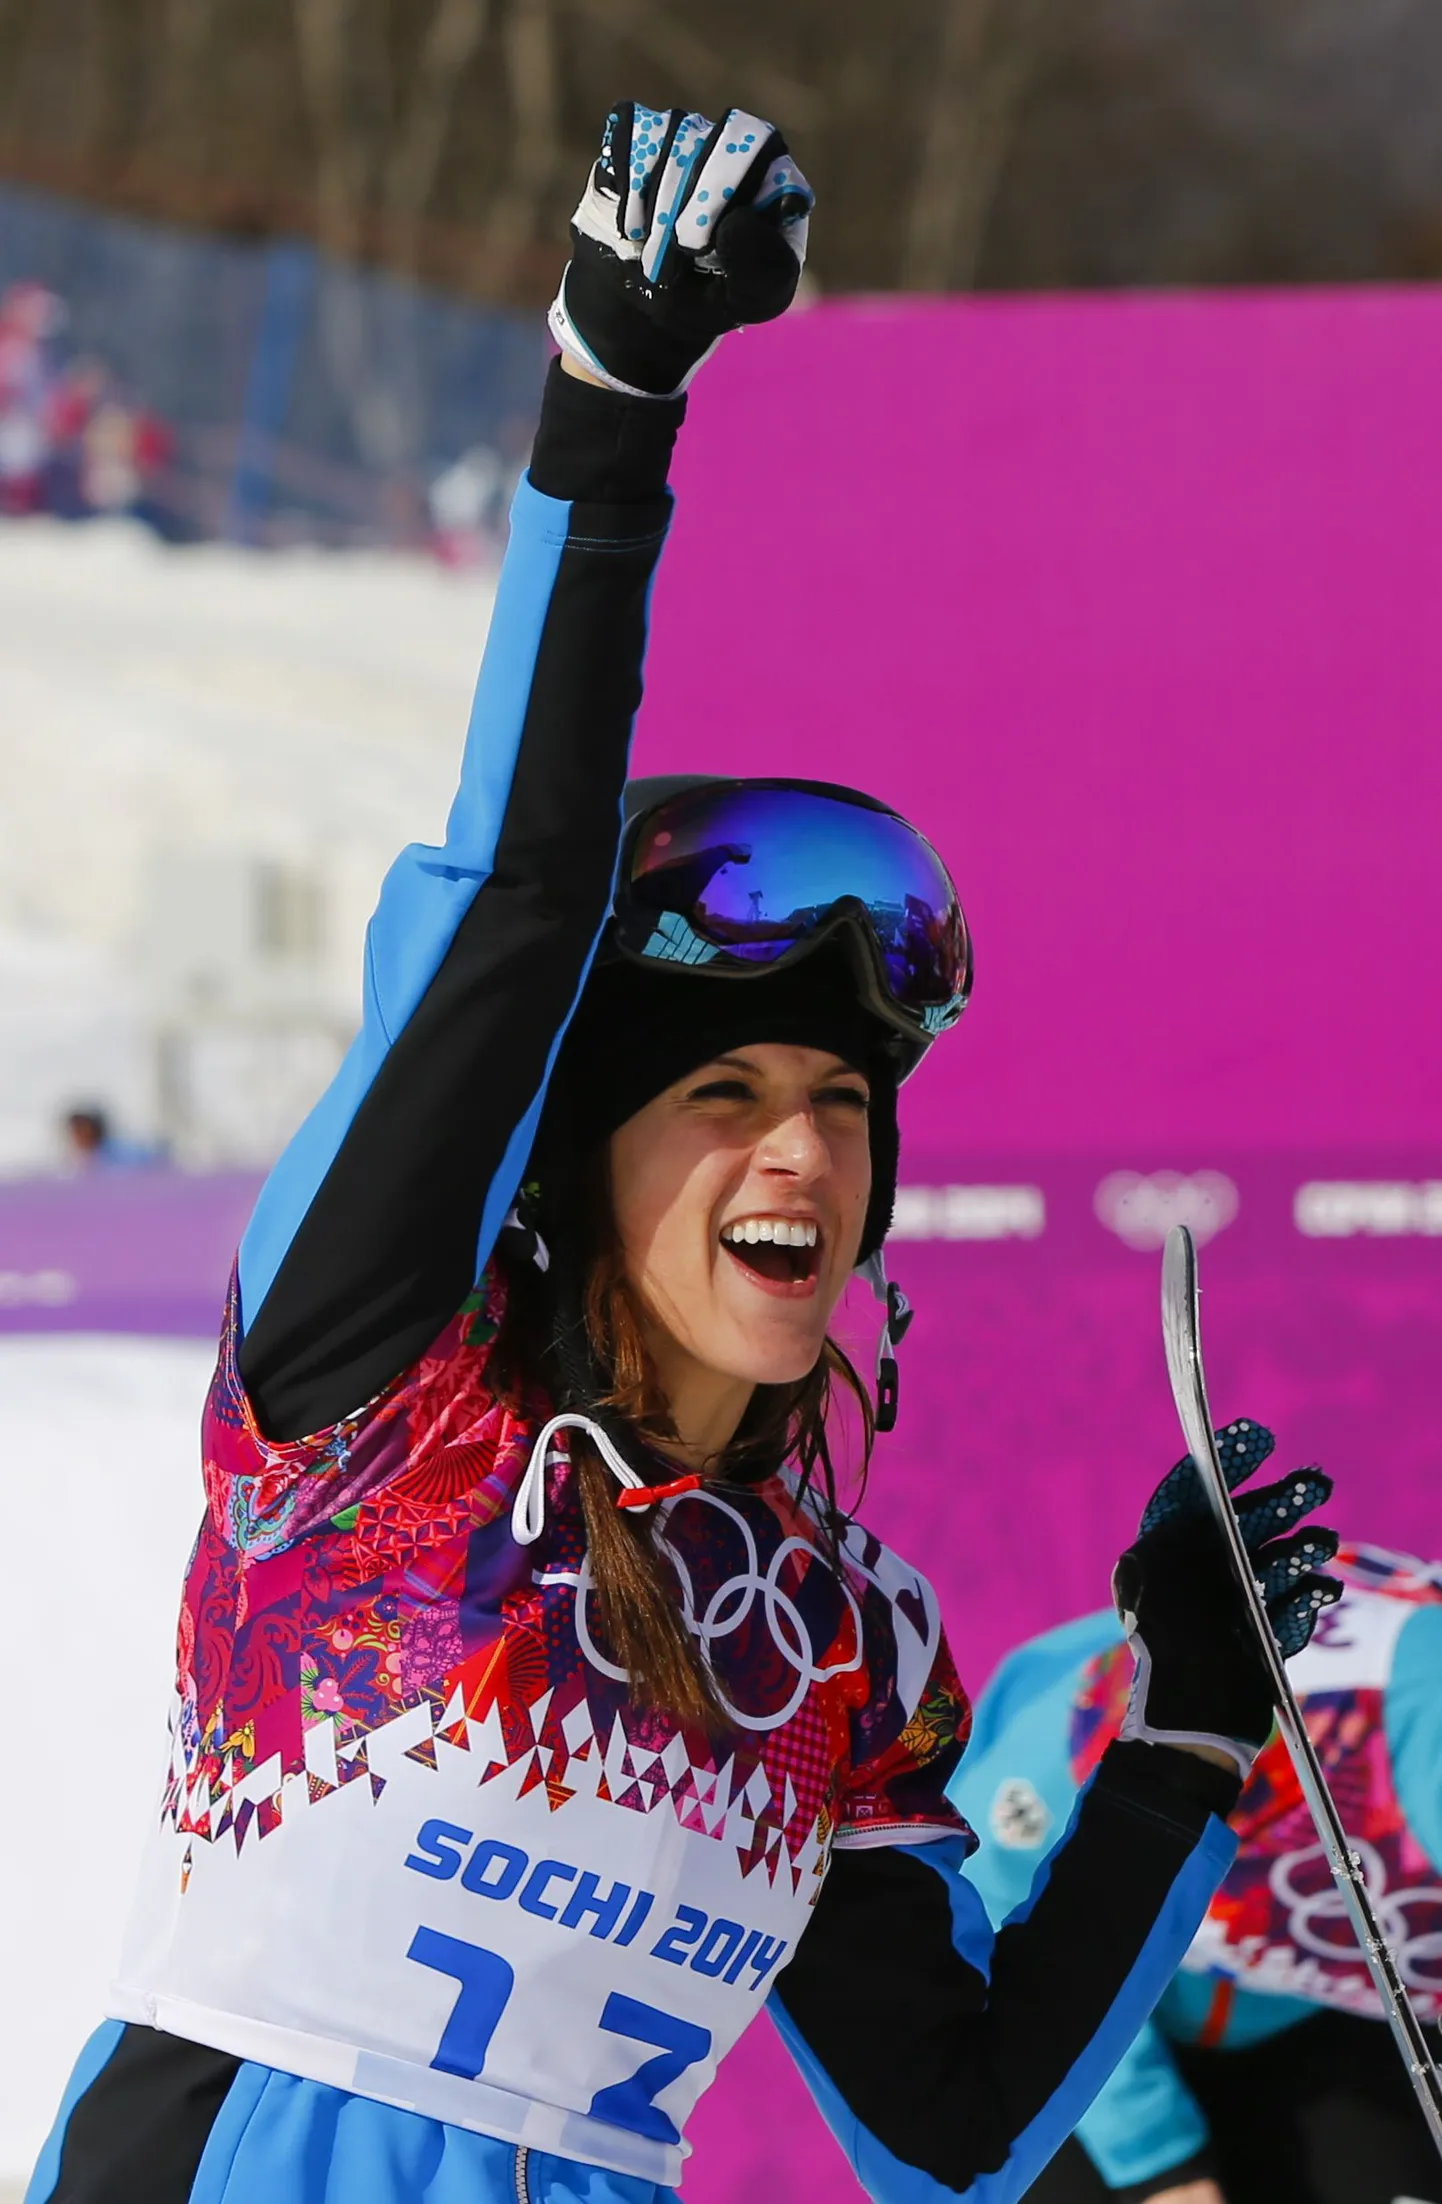 Austria's first placed Julia Dujmovits celebrates after the women's parallel snowboard finals at the 2014 Sochi Winter Olympic Games in Rosa Khutor February 22, 2014.              REUTERS/Lucas Jackson (RUSSIA  - Tags: OLYMPICS SPORT SNOWBOARDING)